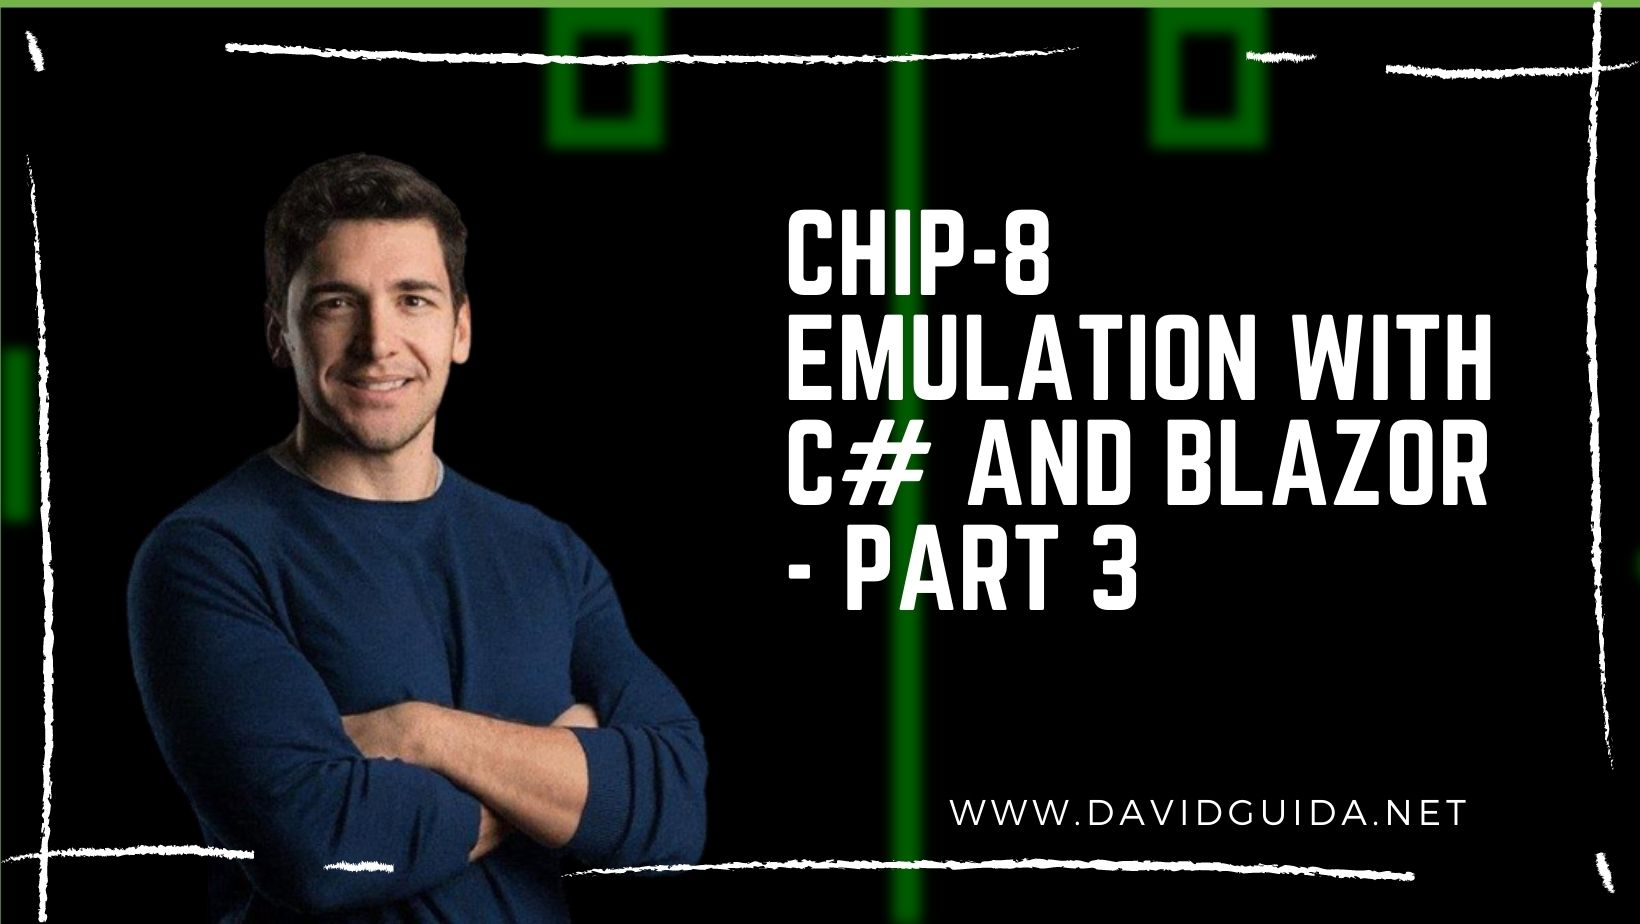 CHIP-8 emulation with C# and Blazor - part 3